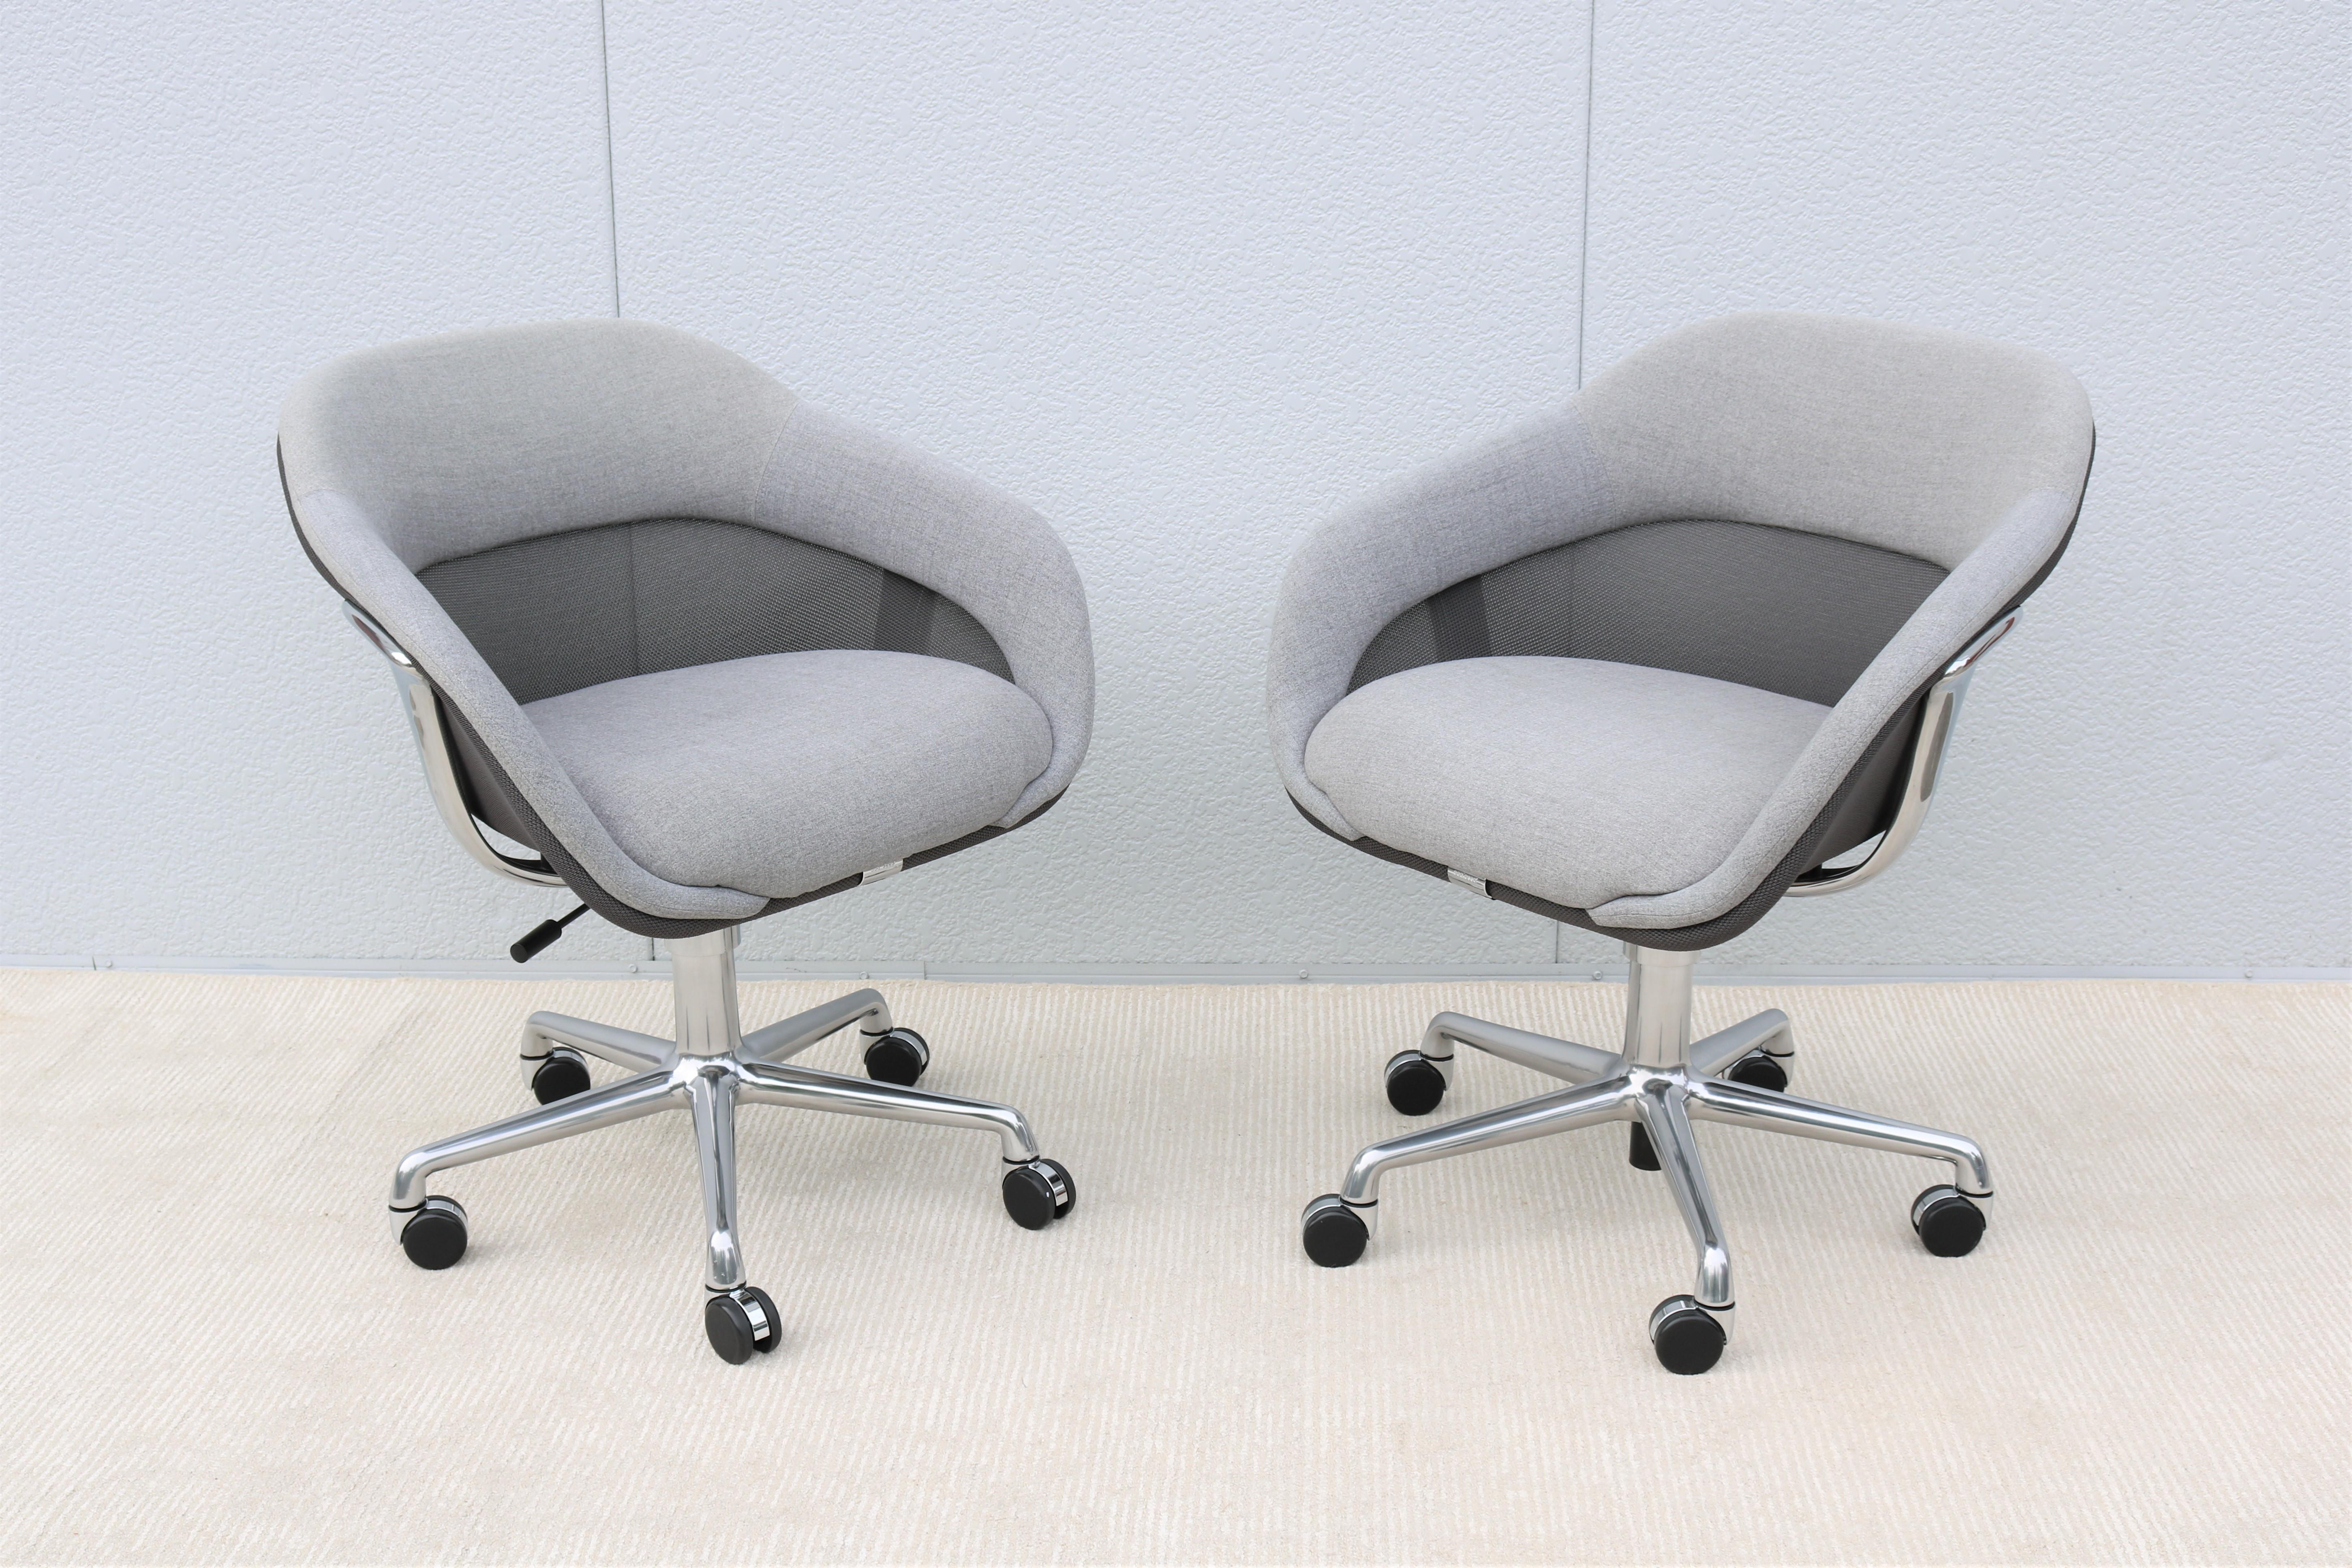 The Modern beauty and elegant design of the SW_1 Conference swivel chair fits seamlessly into any environment and among Mid-Century classic design. 
The breathable mesh back provides increased comfort for long work sessions.

Please note the